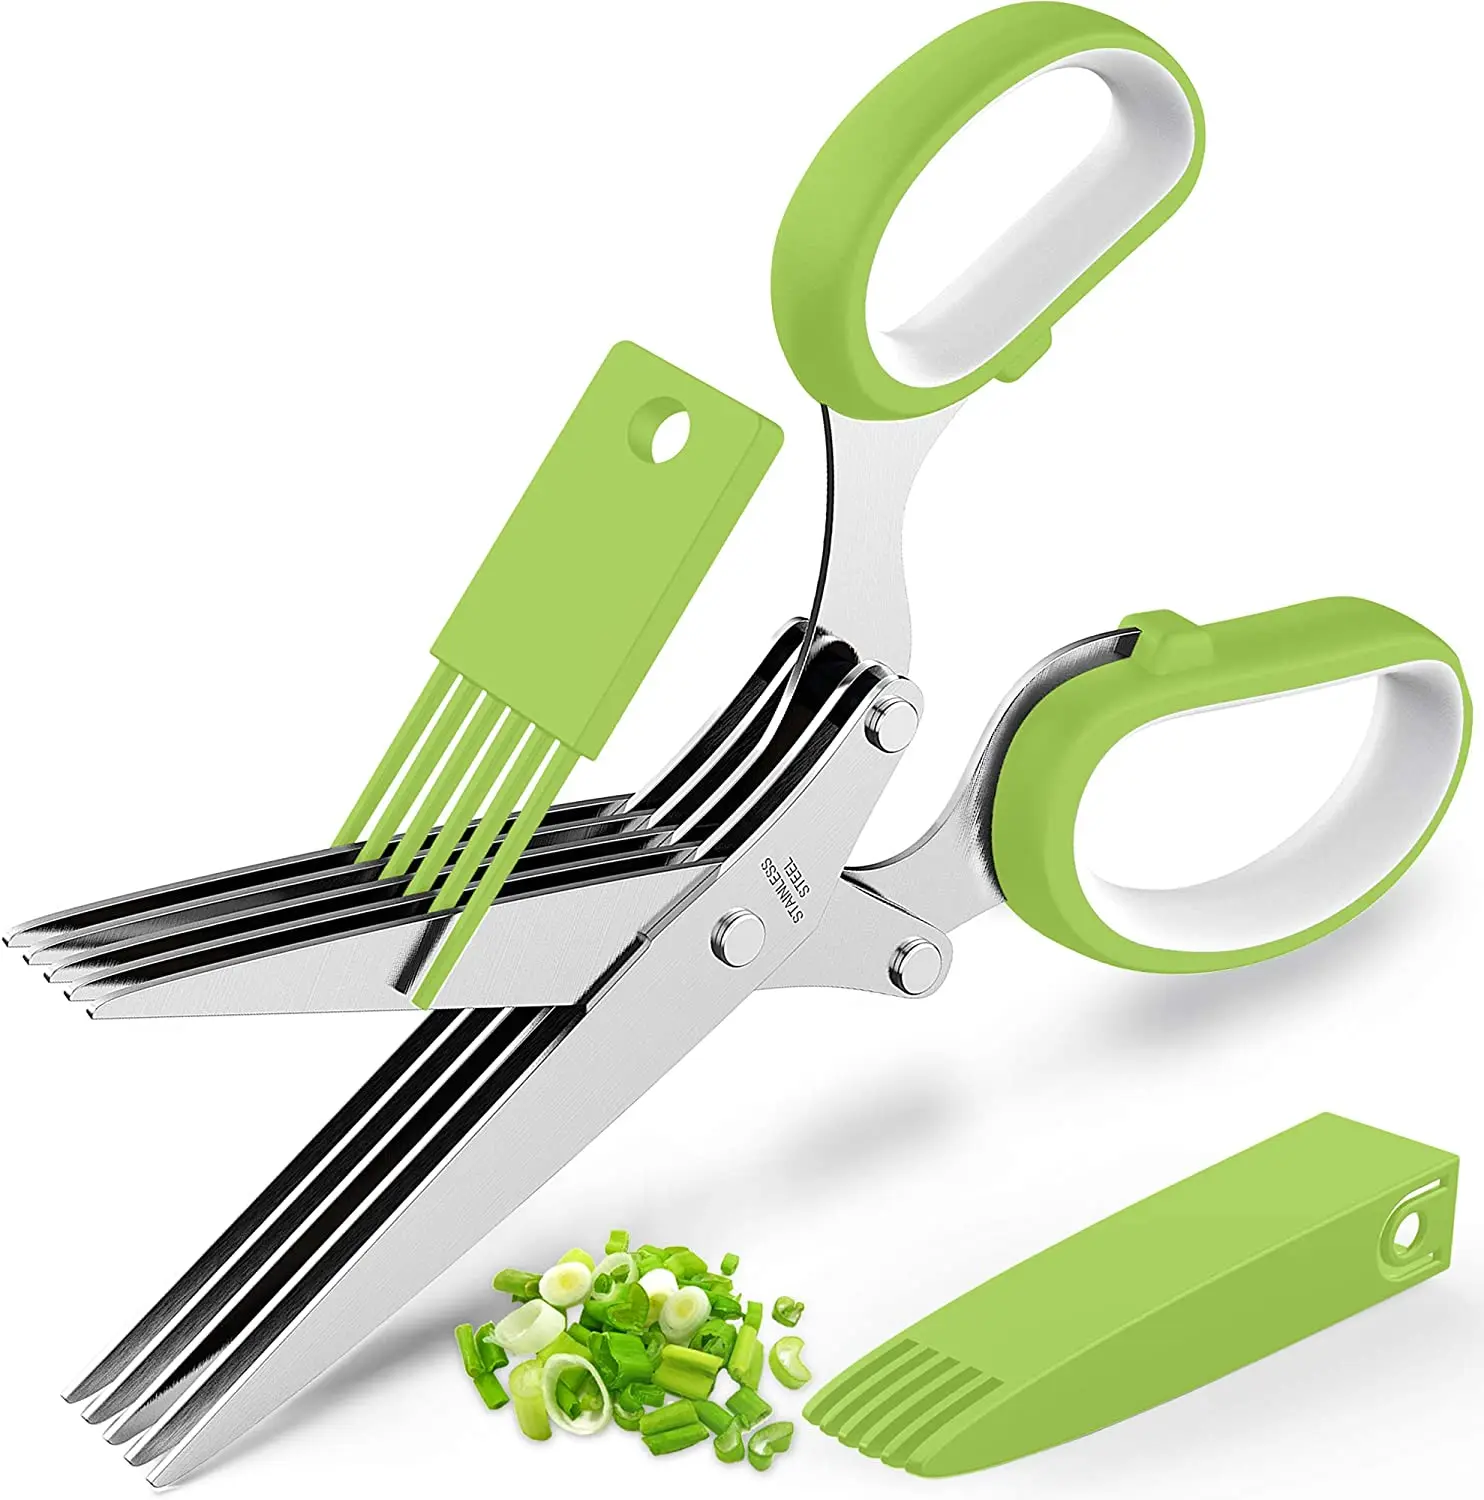 

Sharp Heavy Duty Herb Scissors and Cover Cutter Chopper and Mincer Cool Kitchen Tools Herb Cutter Shears with 5 Blades, Customized color